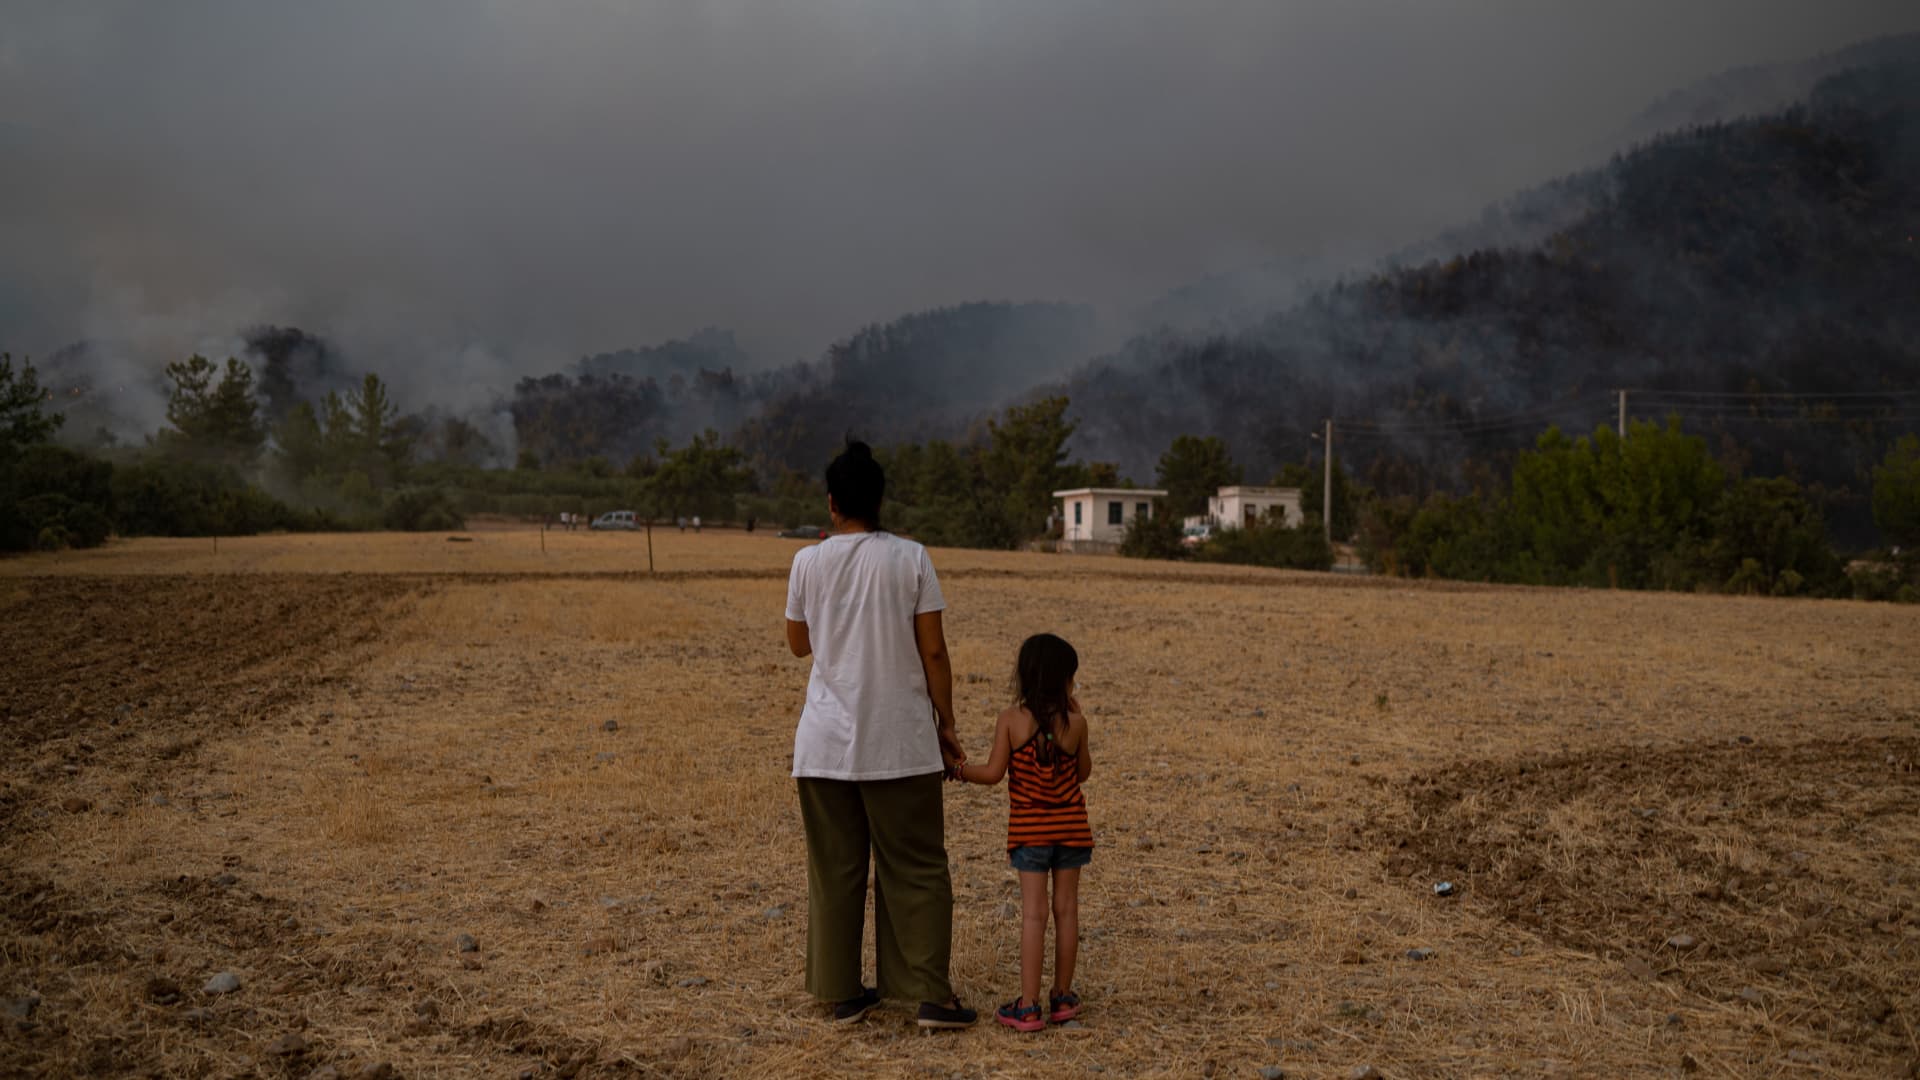 TOPSHOT - A woman and child stand in a field as they watch wildfires as they burn in Koycegiz district of Mugla on August 3, 2021.